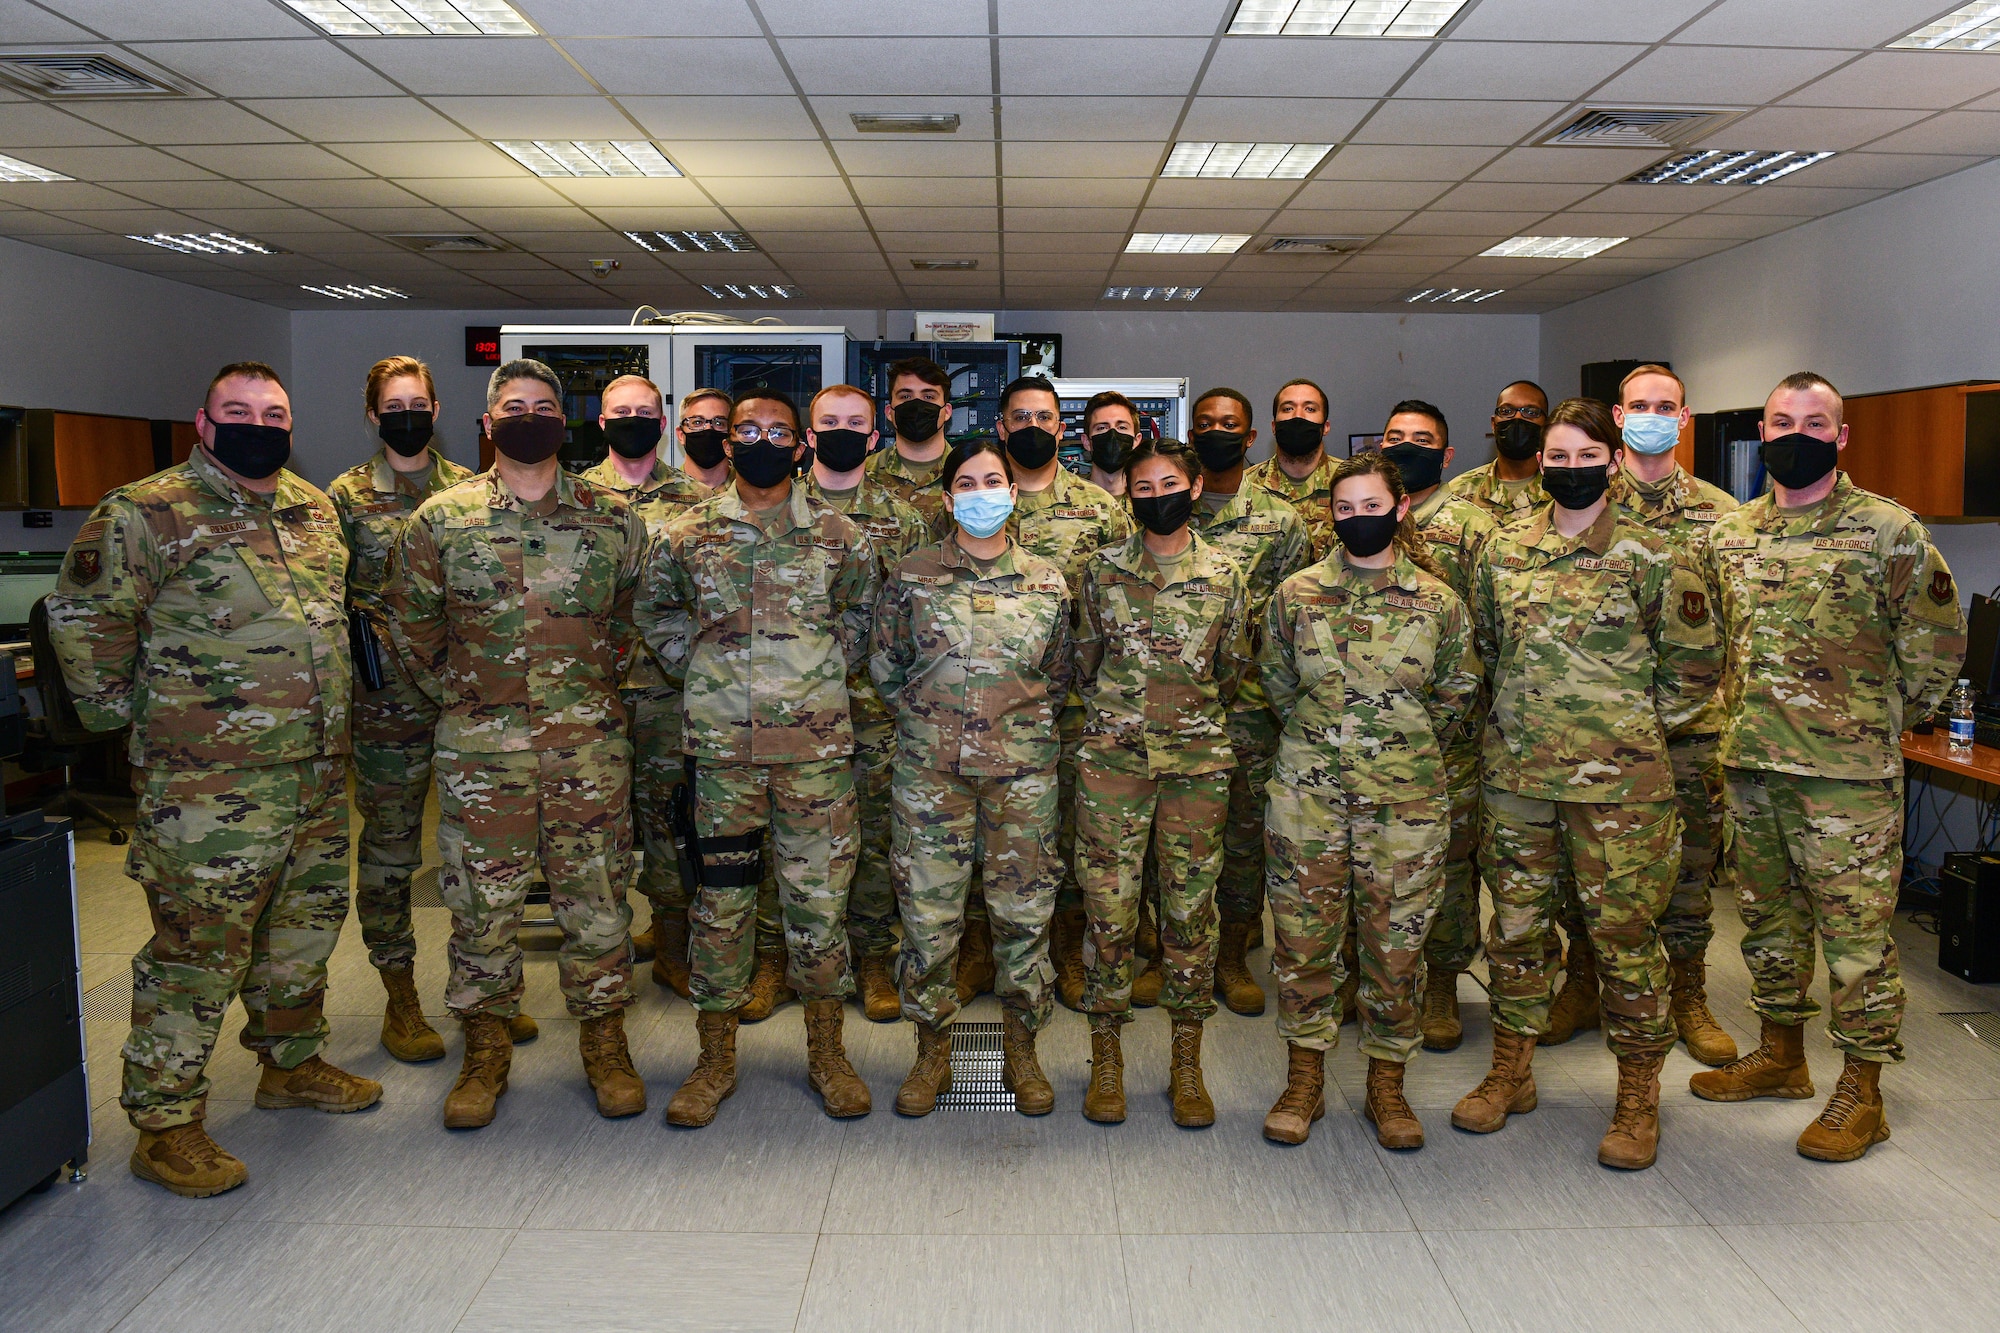 Members from the 31st Fighter Wing Command Post pose for a photo at Aviano Air Base, Italy, Dec. 16, 2021. The 31st FW CP was recognized as U.S. Air Forces in Europe Air Forces in Africa (USAFE-AFA) Large Nuclear Command Post of the Year for 2021. Furthermore, Master Sgt. Melvyn Thompson received the USAFE-AFA Unit Level Command and Control Operations Senior non-commissioned officer of the Year for 2021. (U.S. Air Force photo by Senior Airman Brooke Moeder)